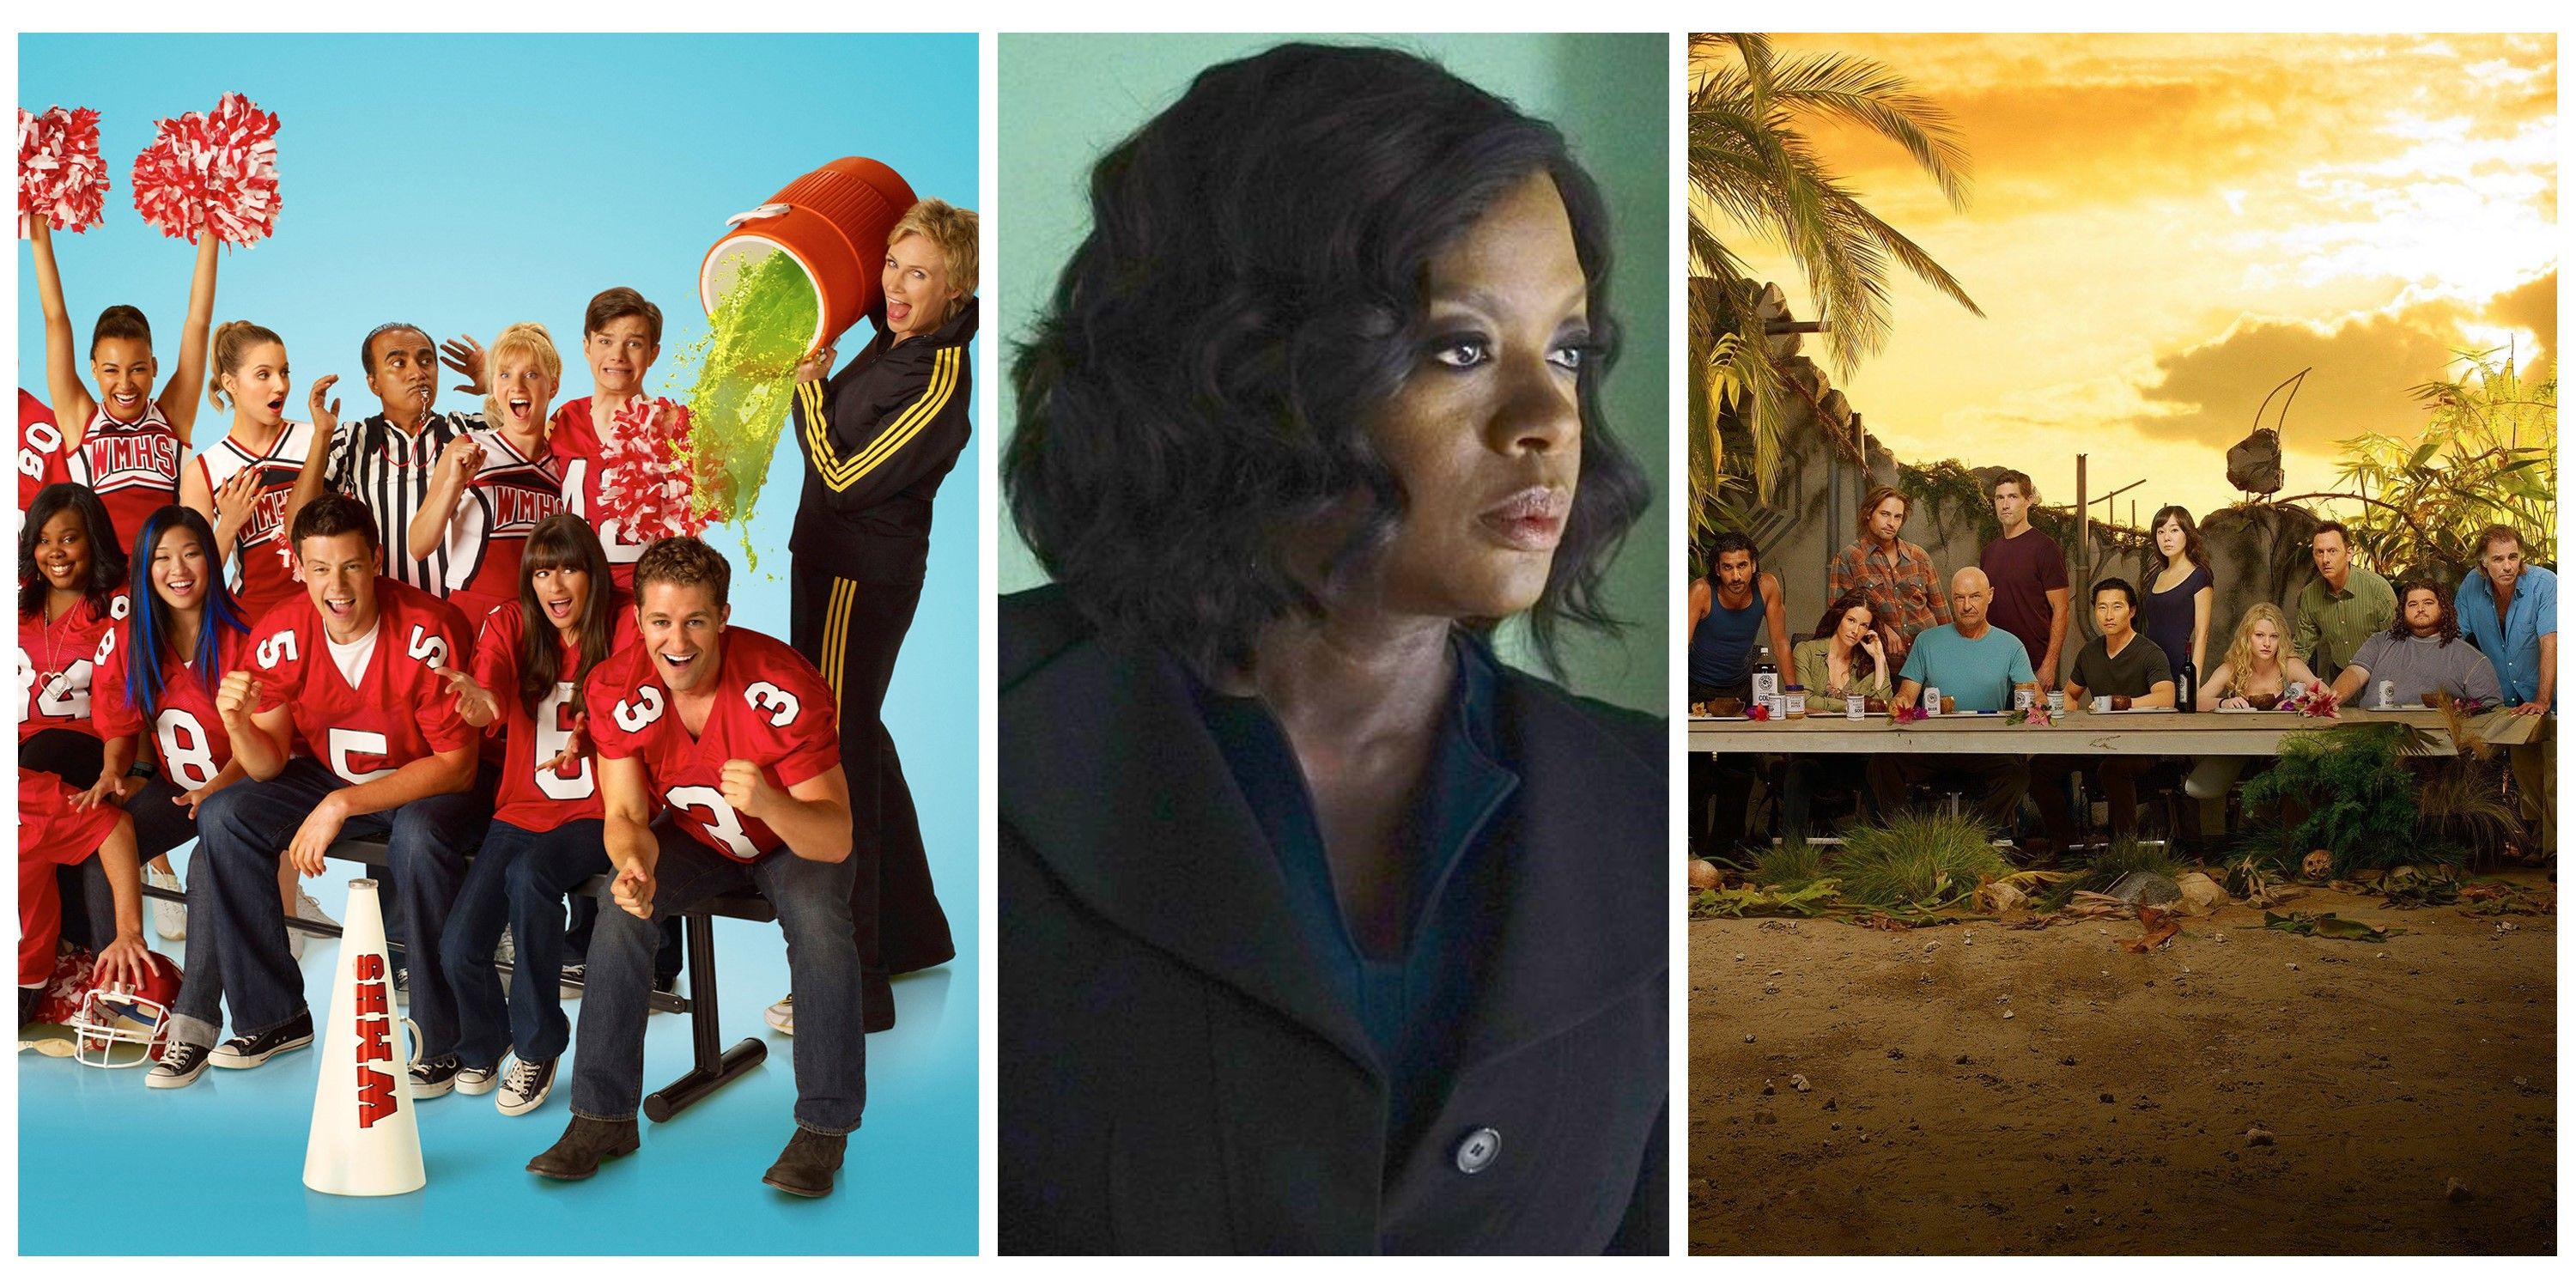 Split image of promo art for Glee, Viola Davis in How To Get Away With Murder, and promo art for Lost